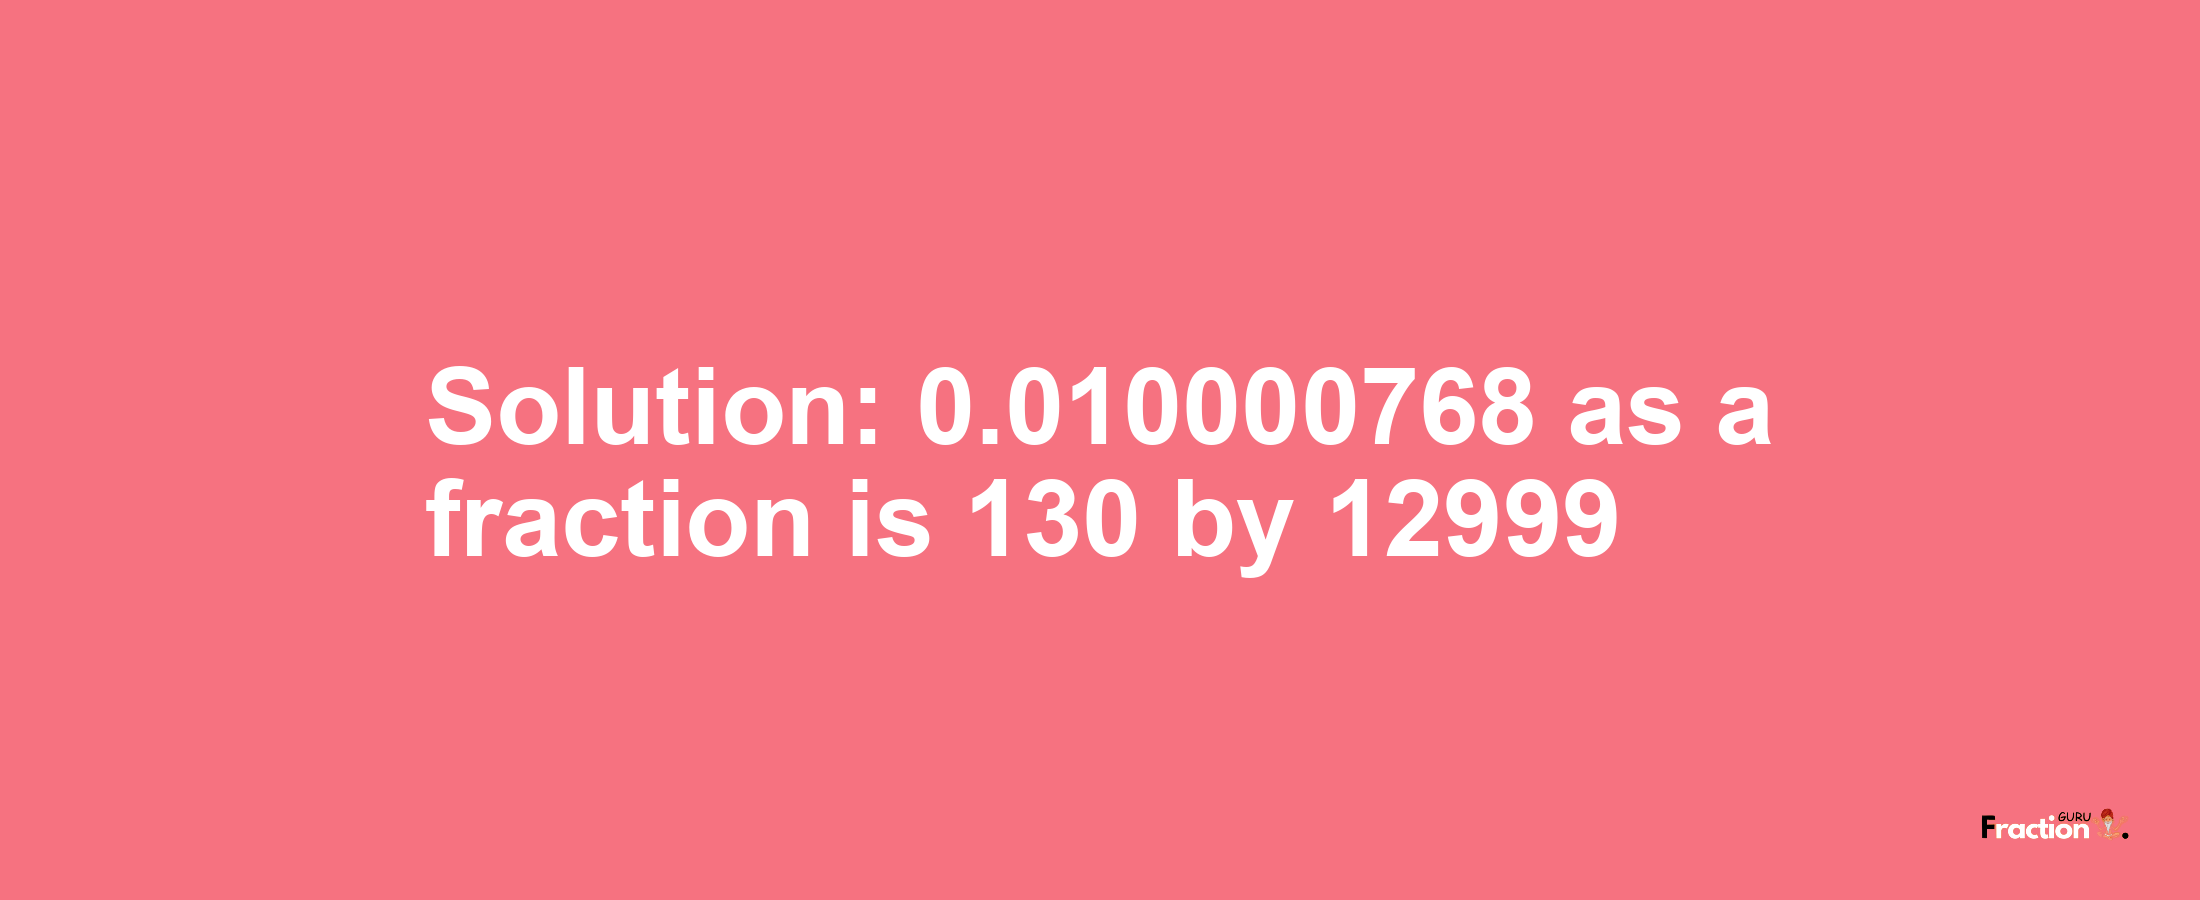 Solution:0.010000768 as a fraction is 130/12999